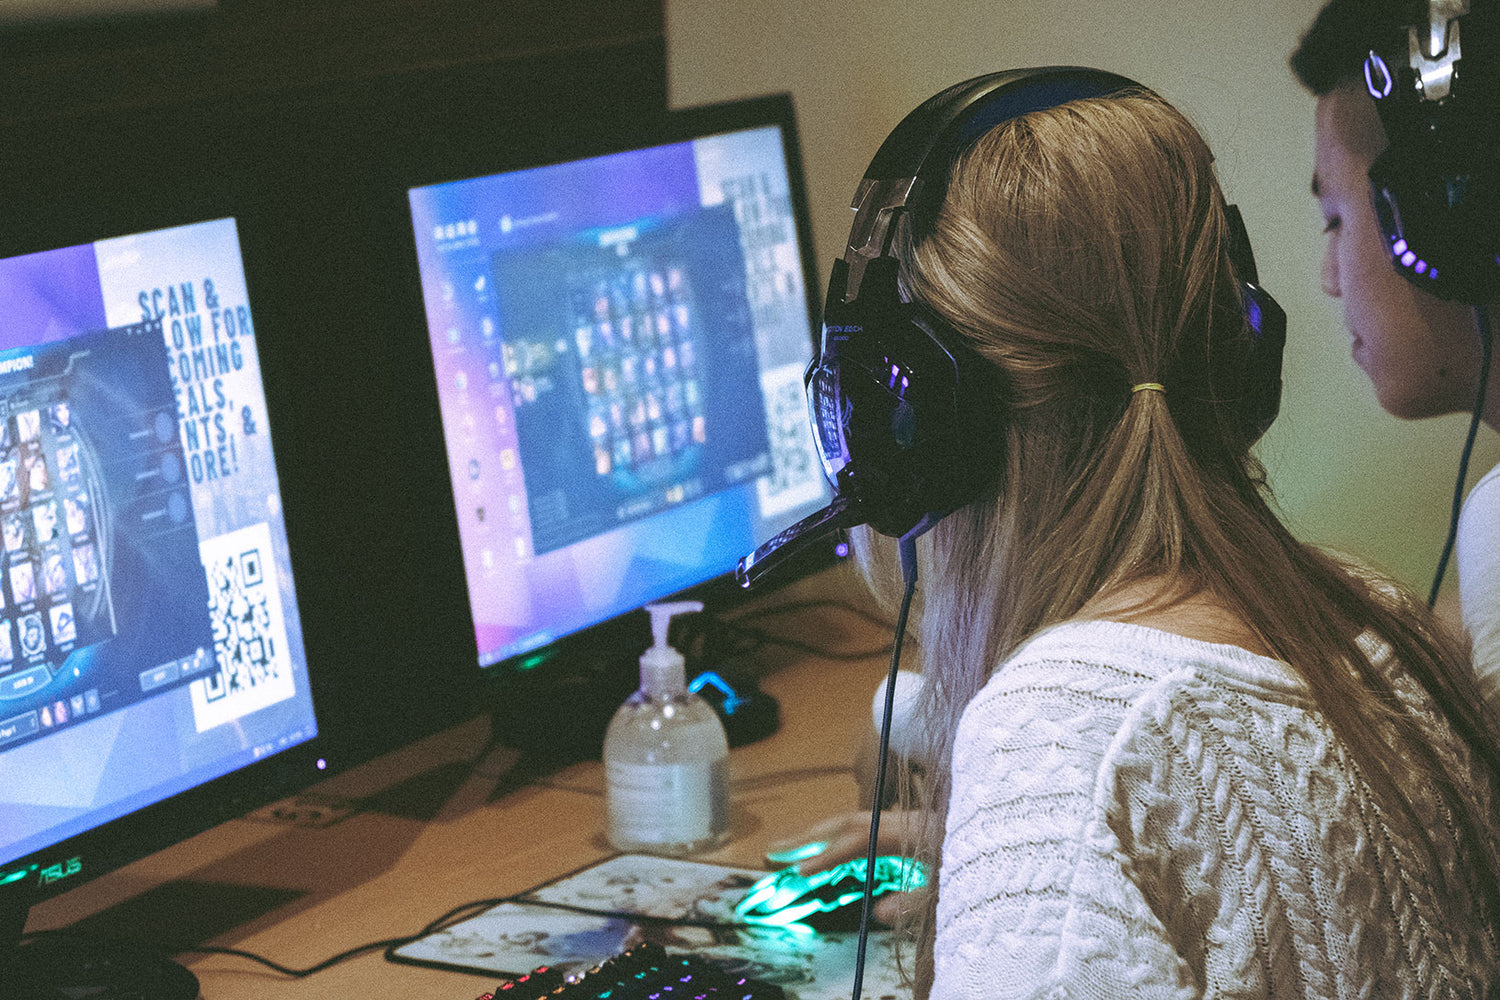 Side profile of a focused female gamer with long hair wearing a headset, sitting in front of a computer screen displaying a character selection menu for a video game. A QR code for gaming deals and a hand sanitizer bottle are also visible on the desk, indicating health safety measures and interactive promotions in the gaming space.